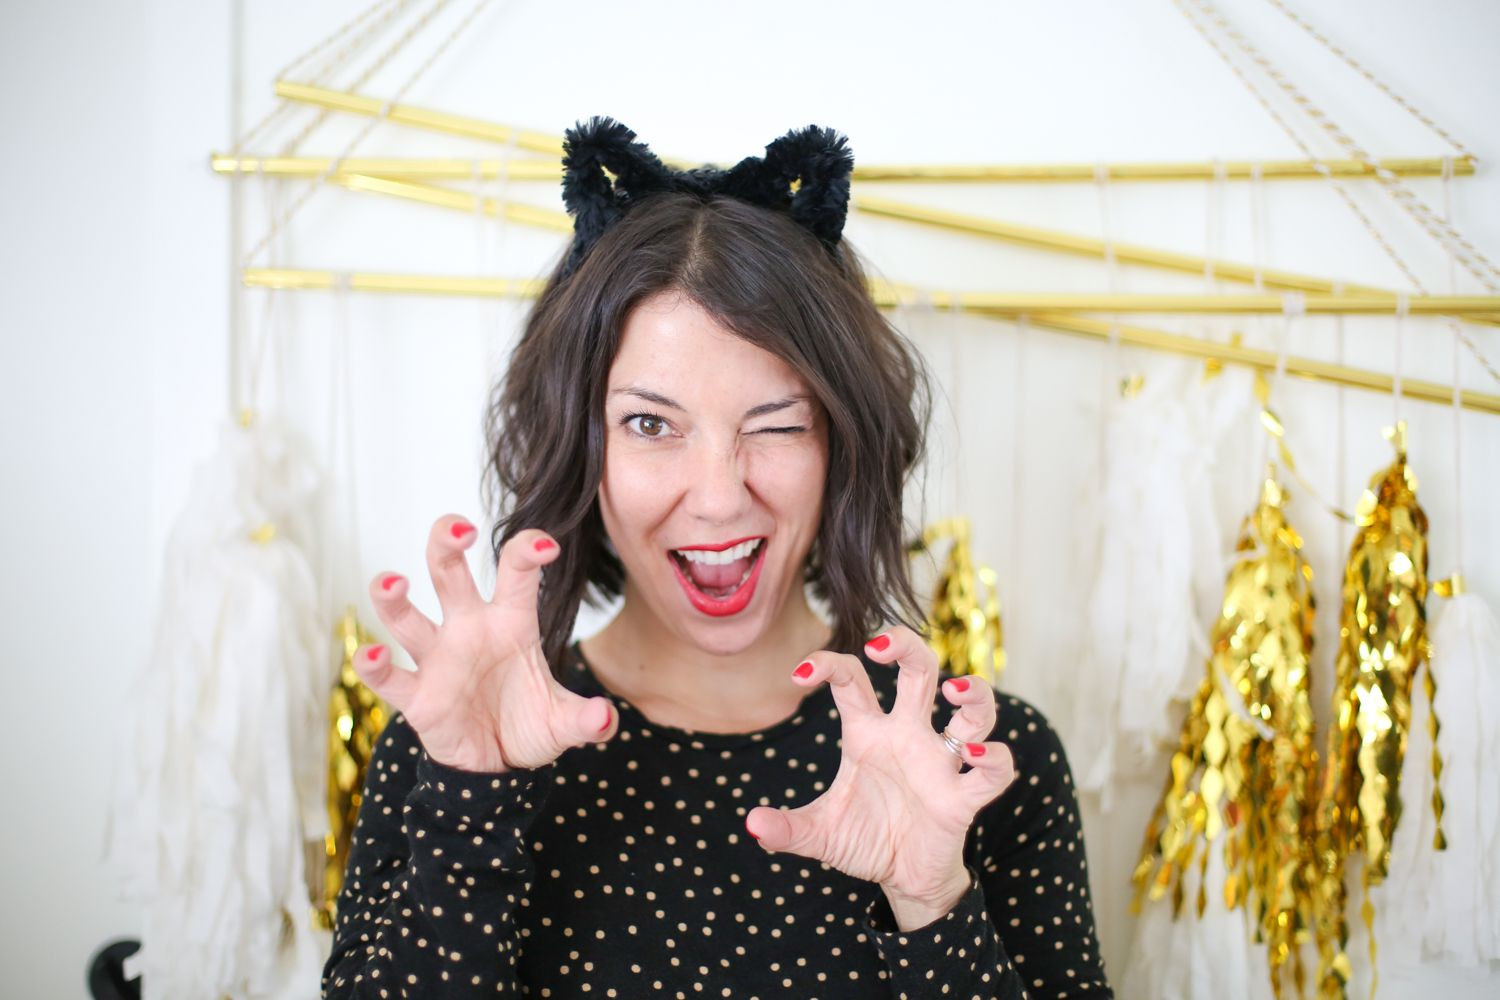 DIY Cat Costume For Adults
 50 Easy DIY Halloween Costume Ideas for Adults